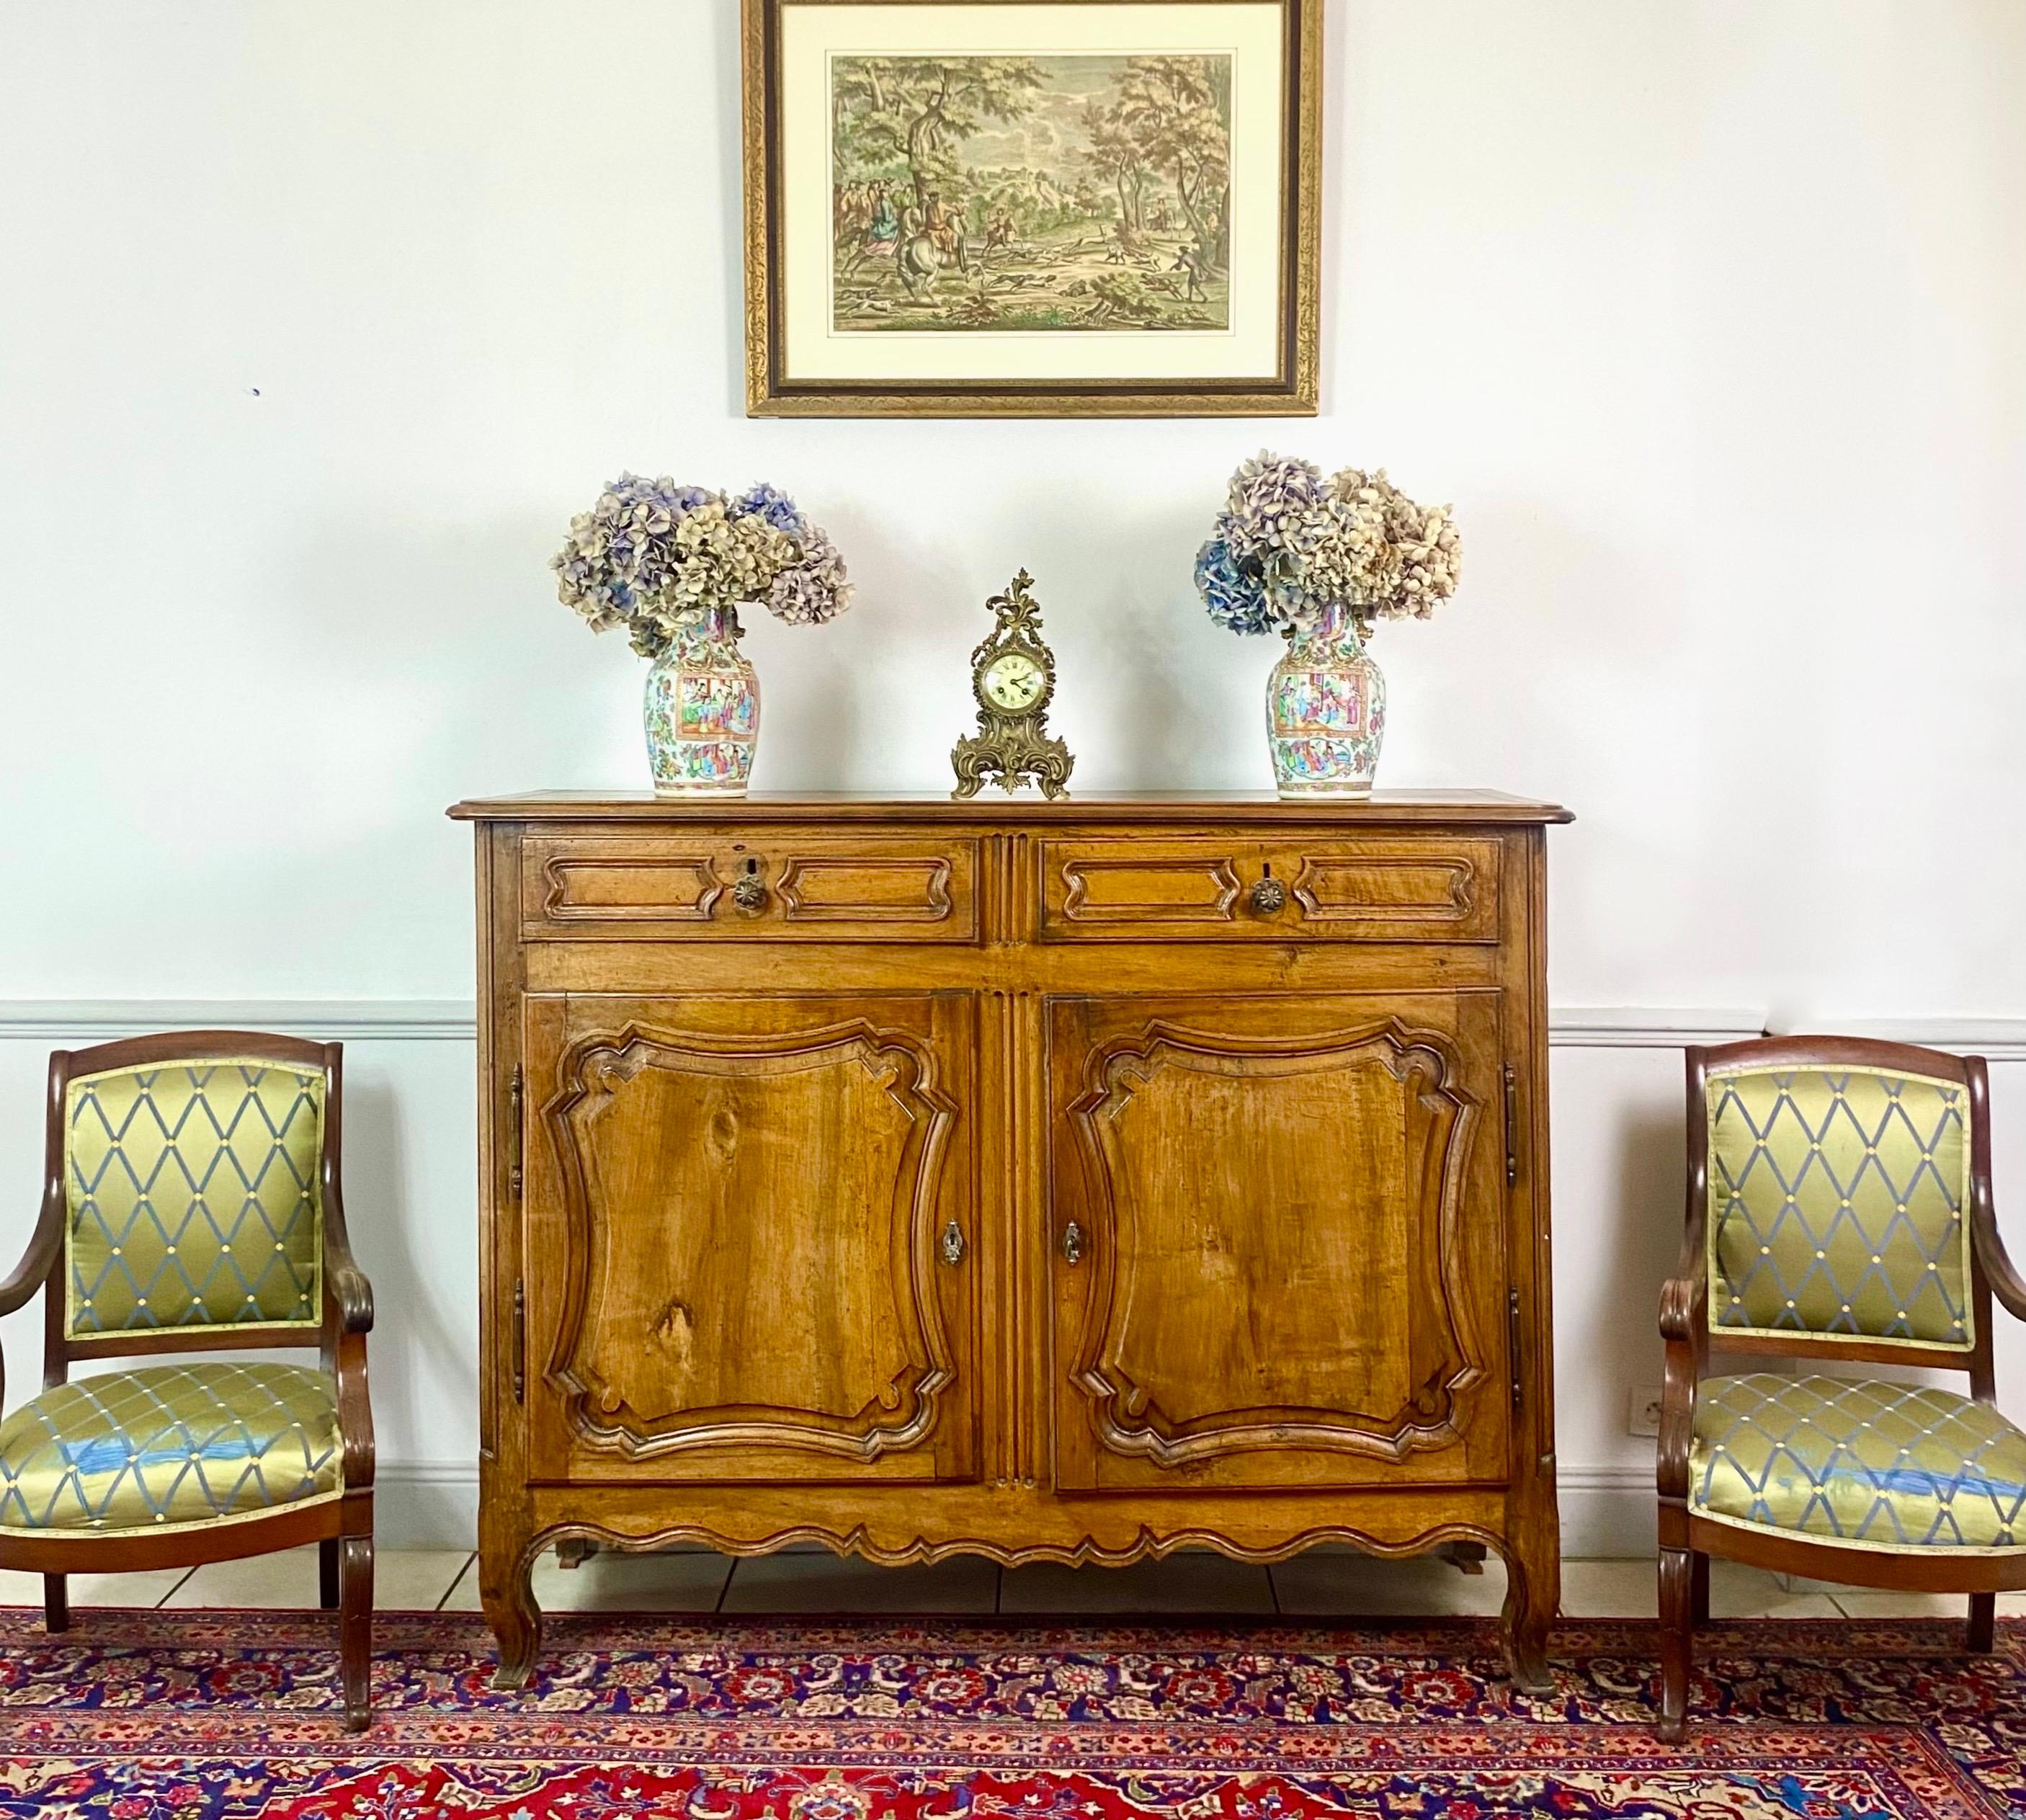 French Provençal sideboard in walnut - Louis XV Period - 18th century - France For Sale 7